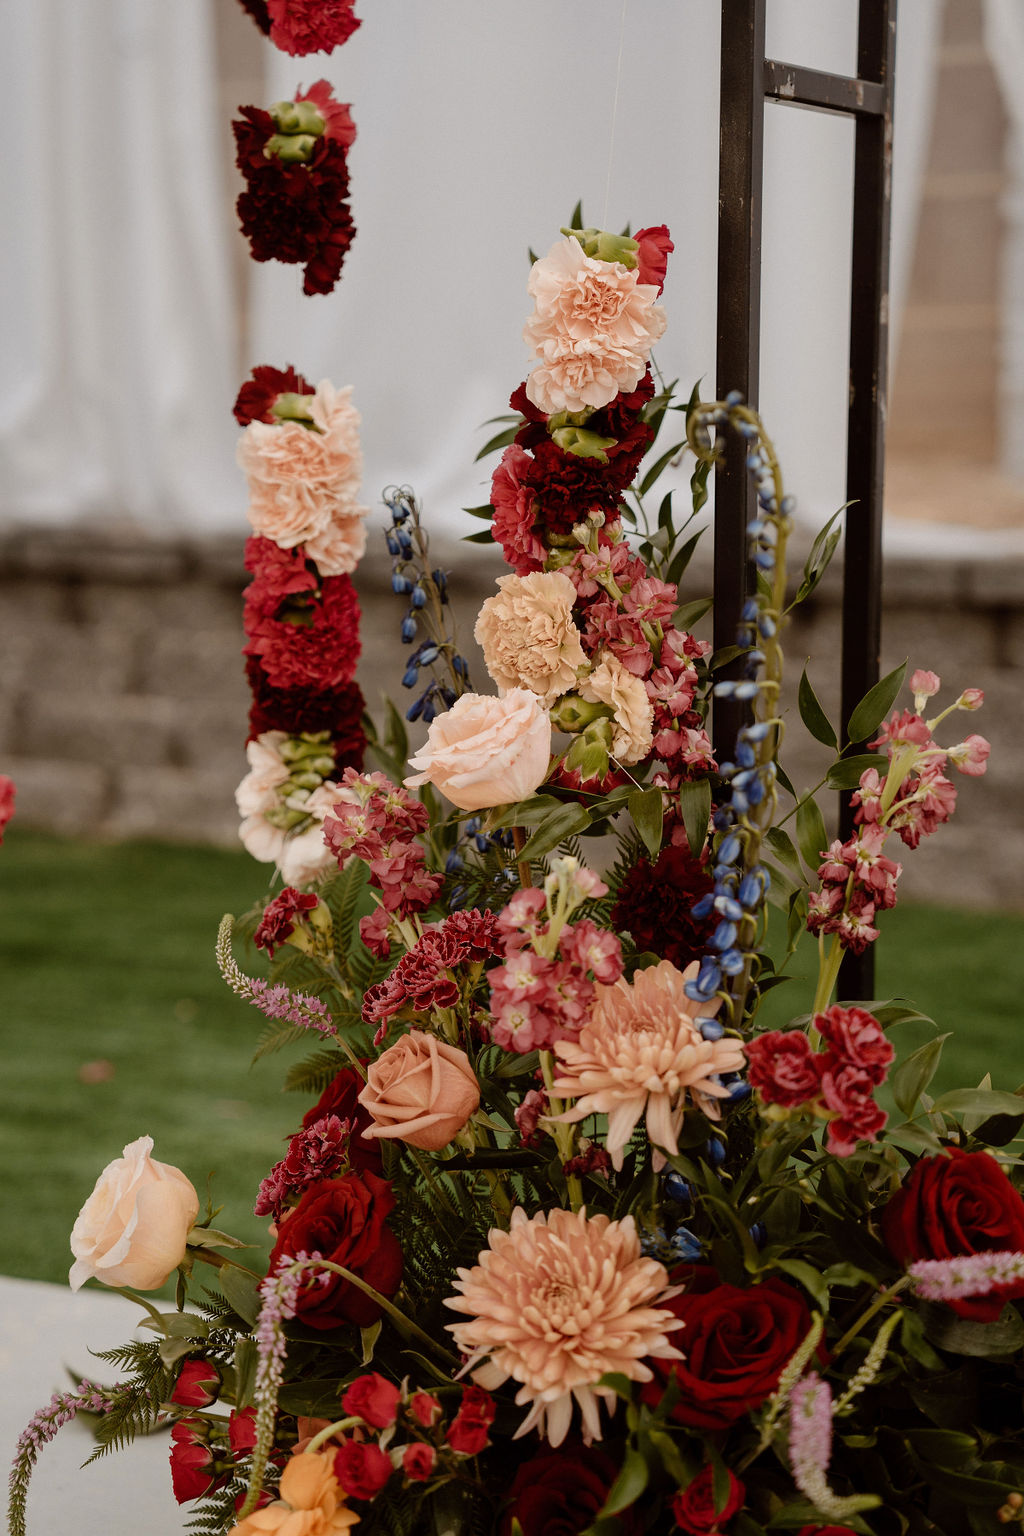 An elegant floral arrangement with roses, chrysanthemums, and other flowers in shades of pink, red, and cream.